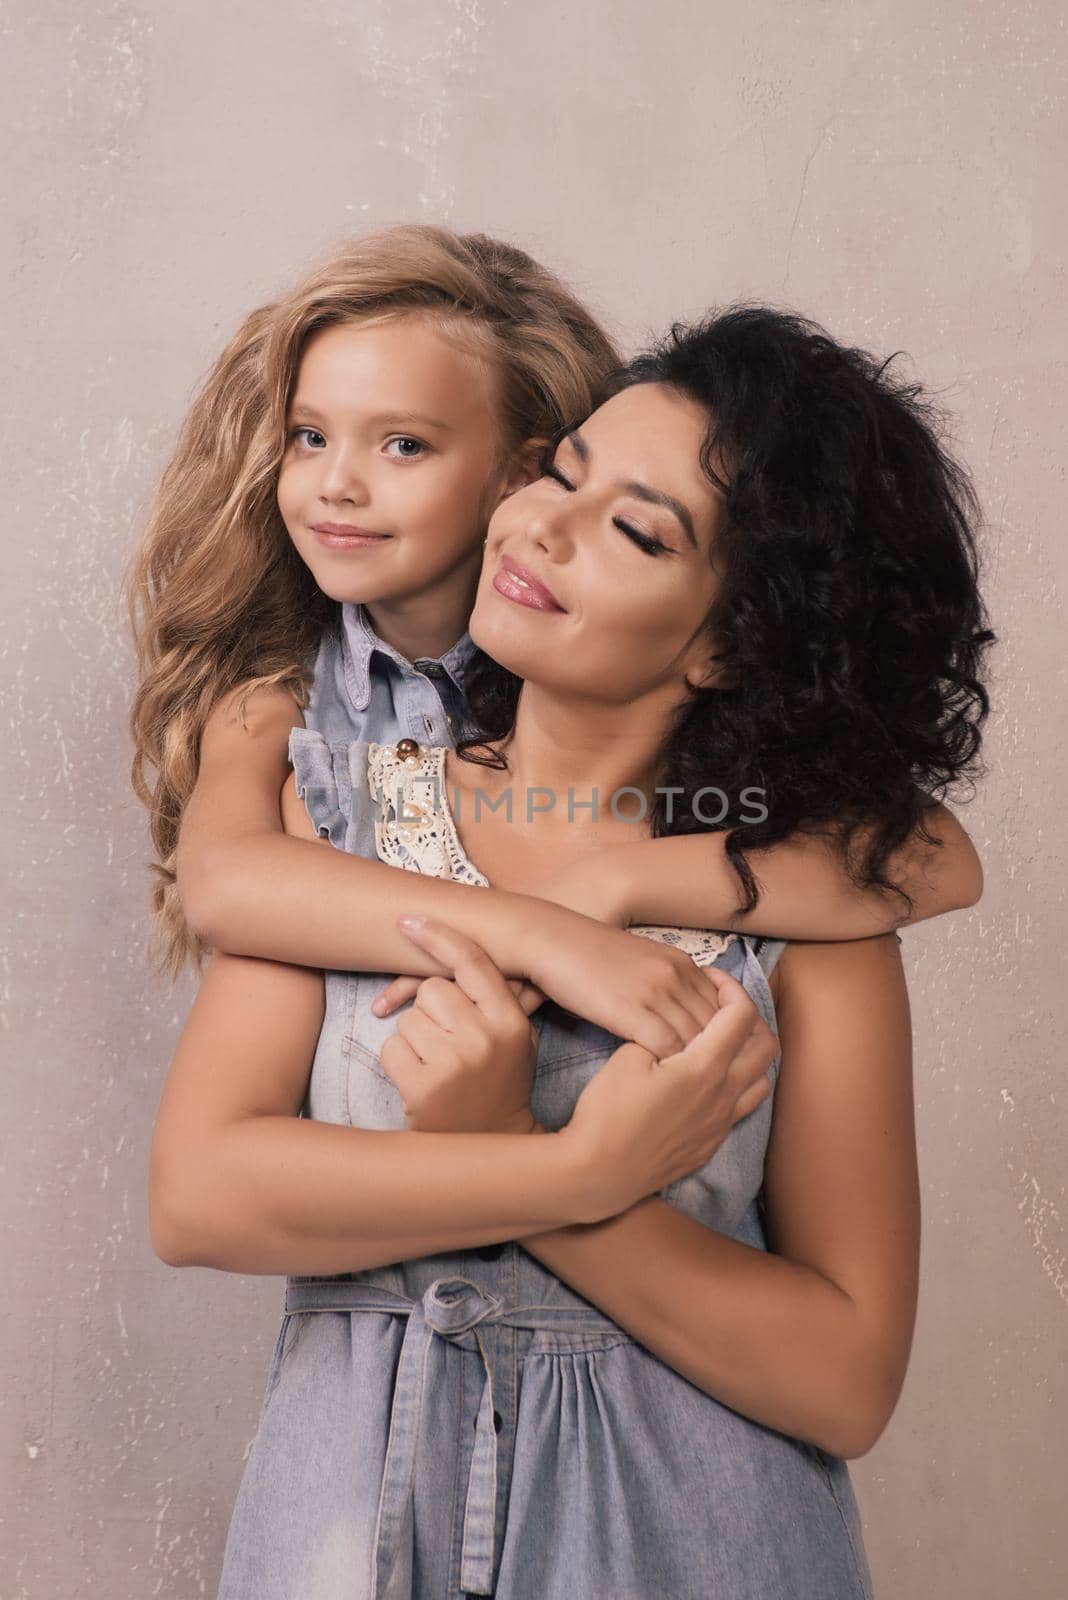 Little girl hugging happy mom from behind near grey wall